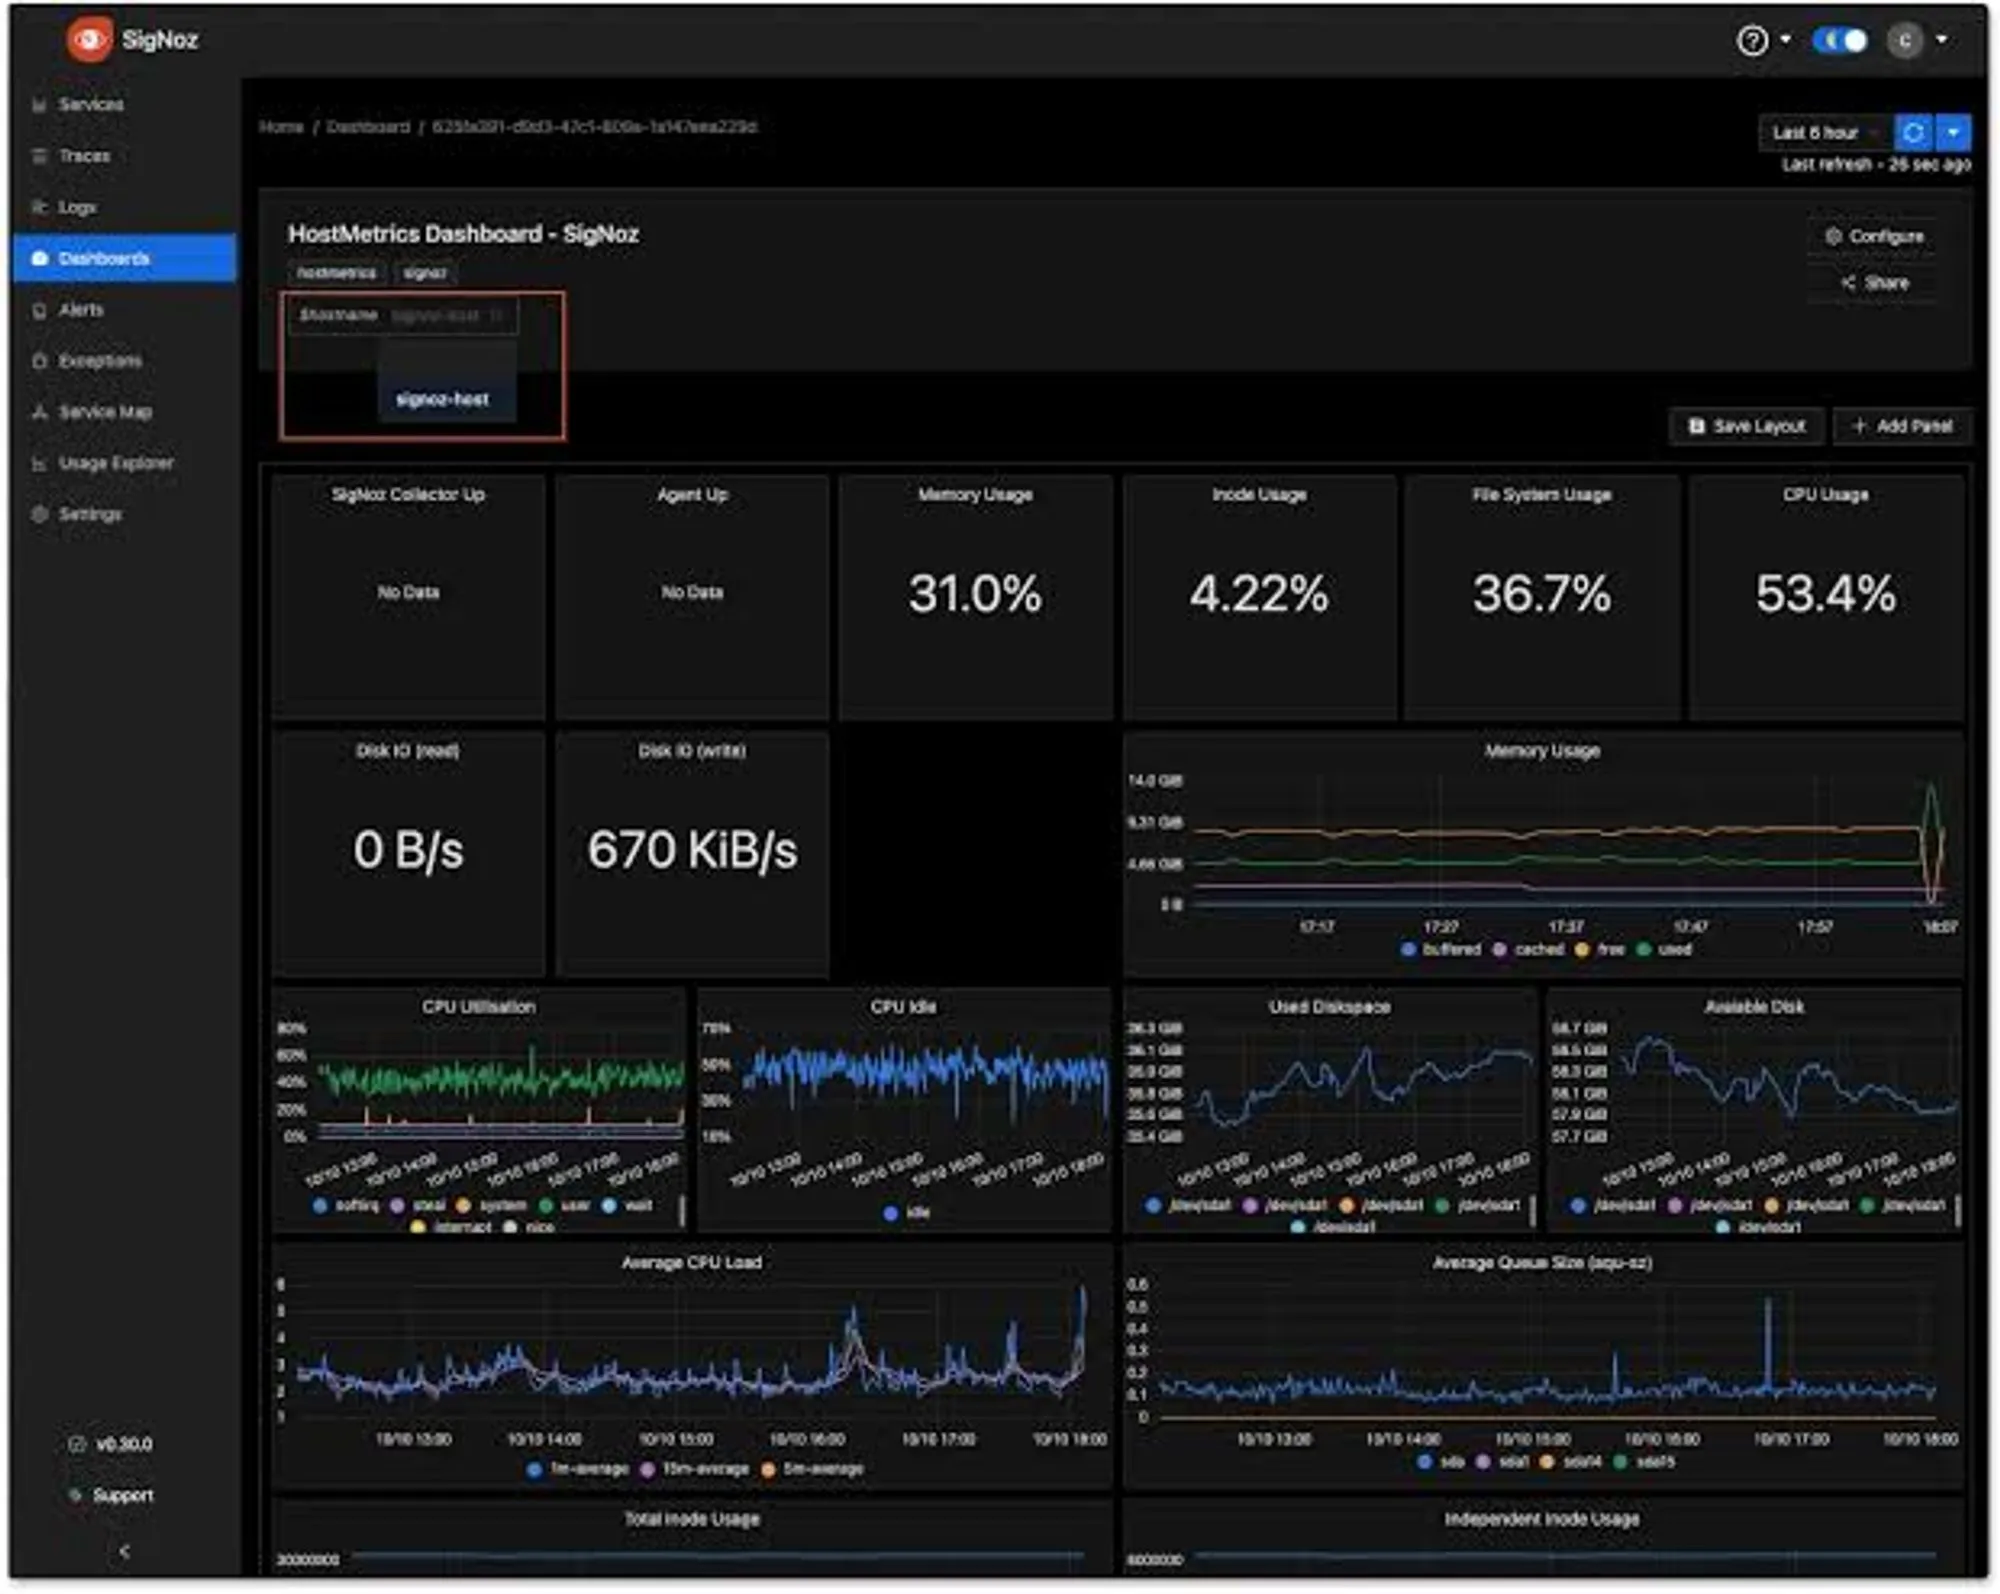 Infrastructure monitoring dashboard in SigNoz